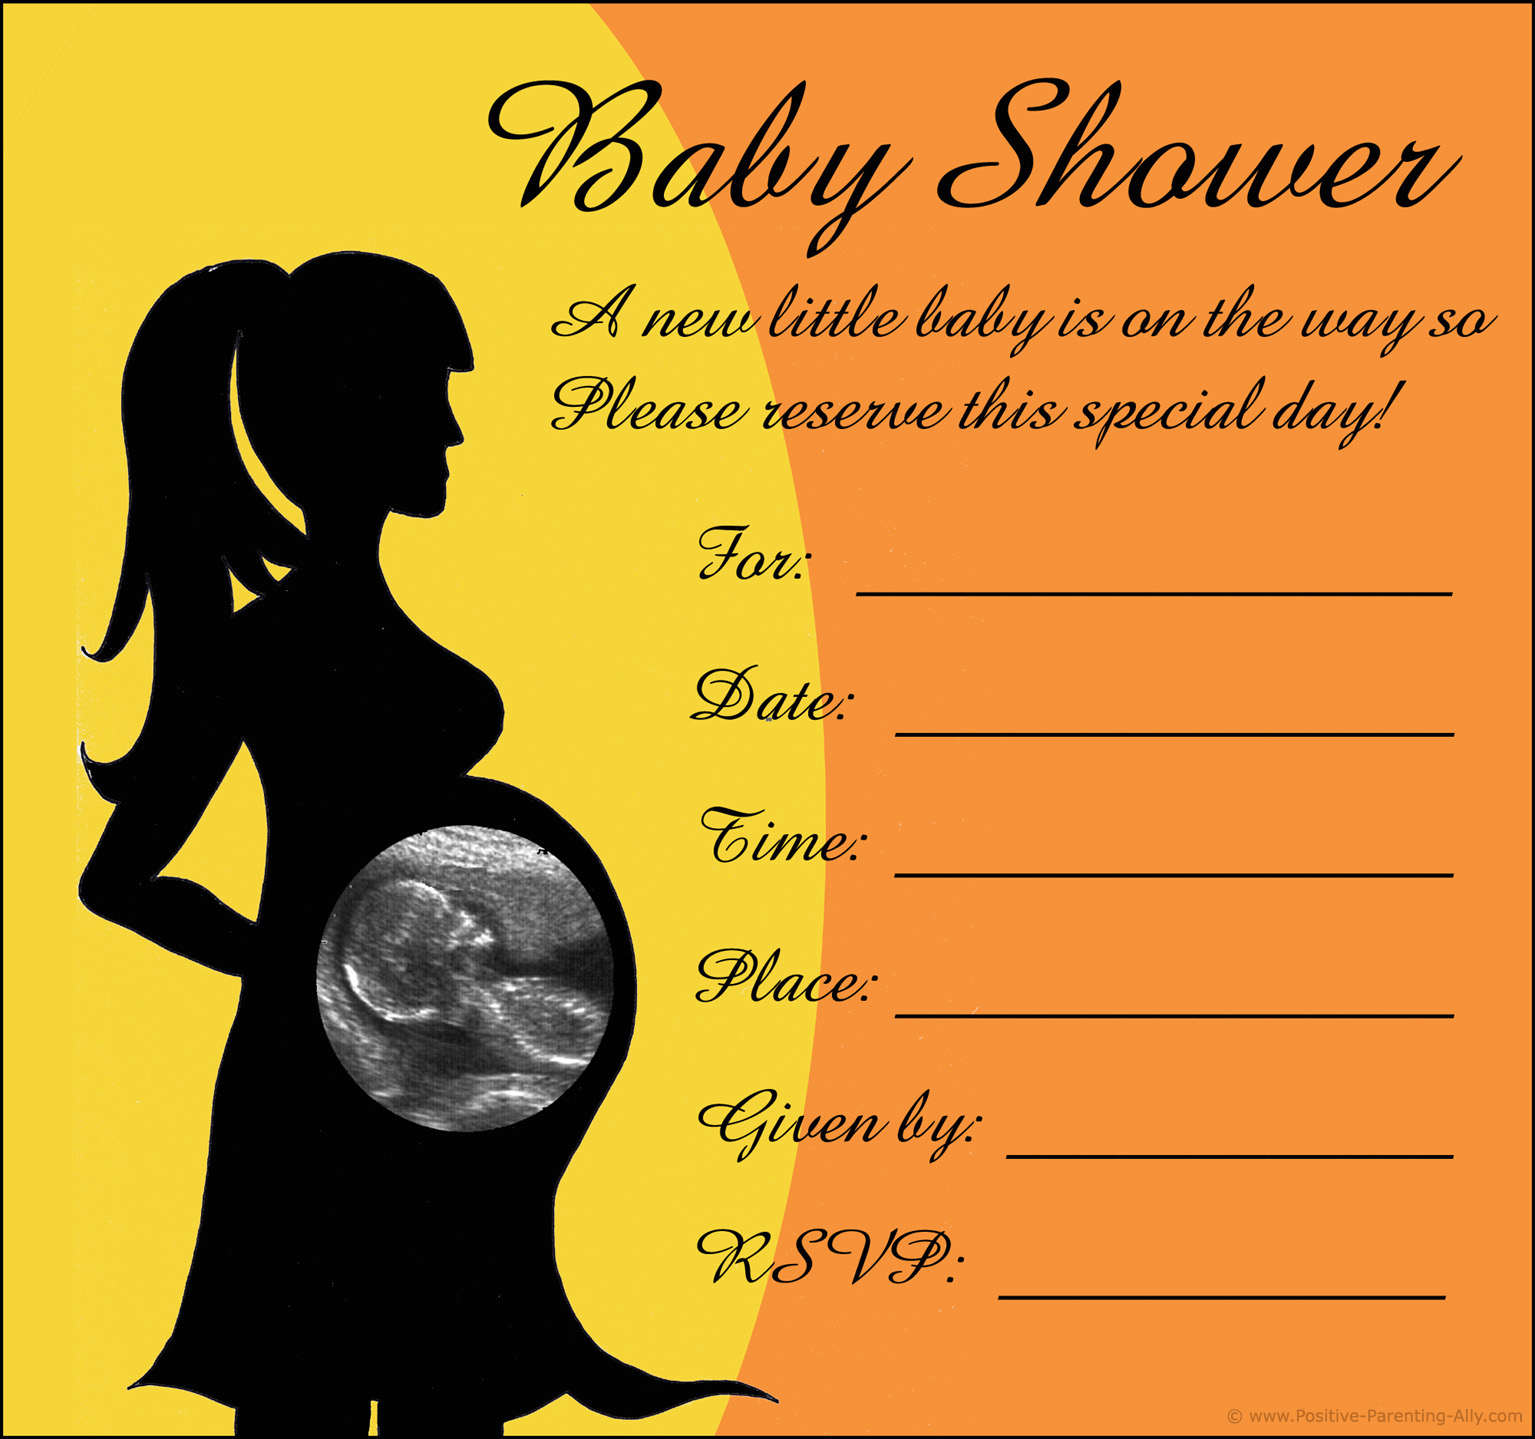 Free Printable Baby Shower Invitations In High Quality Resolution - Create Your Own Baby Shower Invitations Free Printable